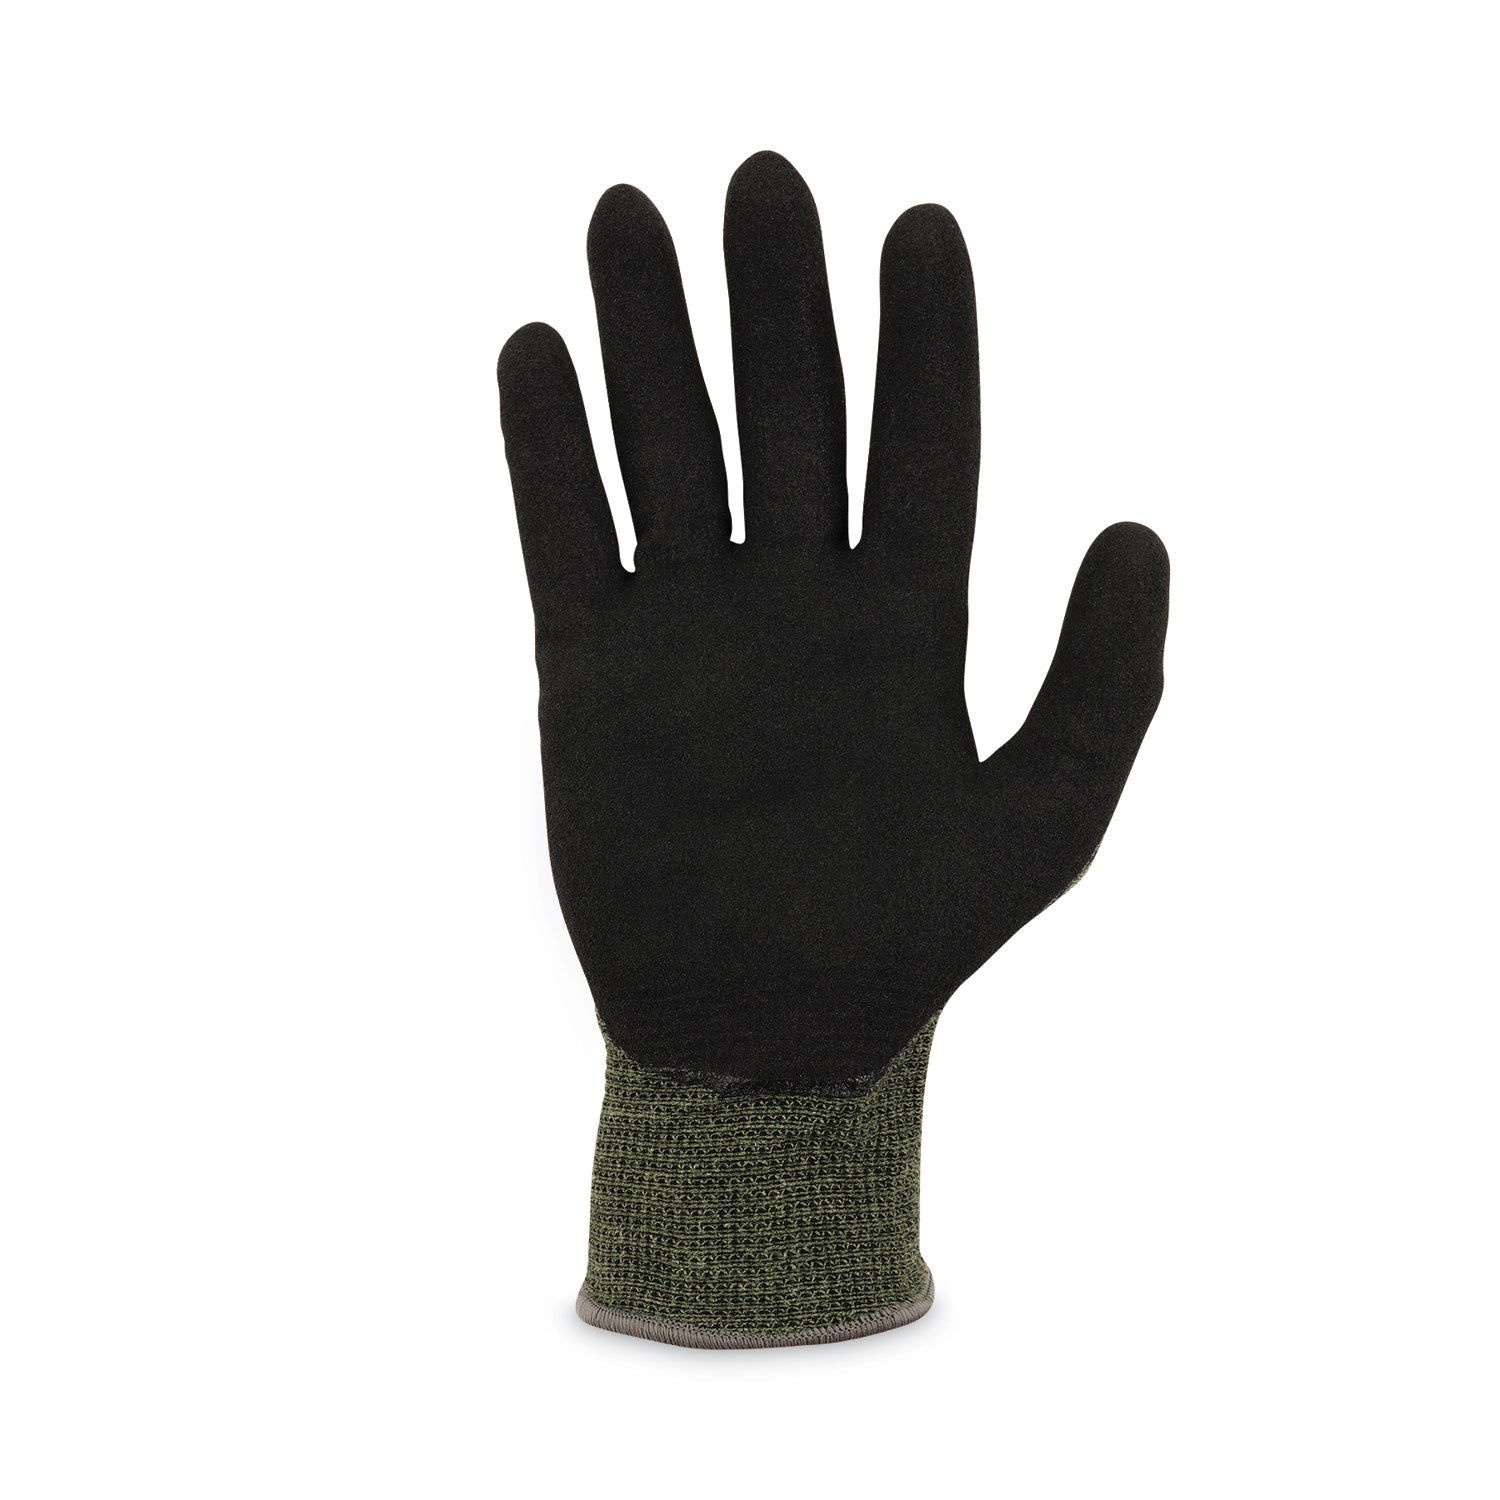 proflex-7042-ansi-a4-nitrile-coated-cr-gloves-green-medium-12-pairs-pack-ships-in-1-3-business-days_ego10333 - 8